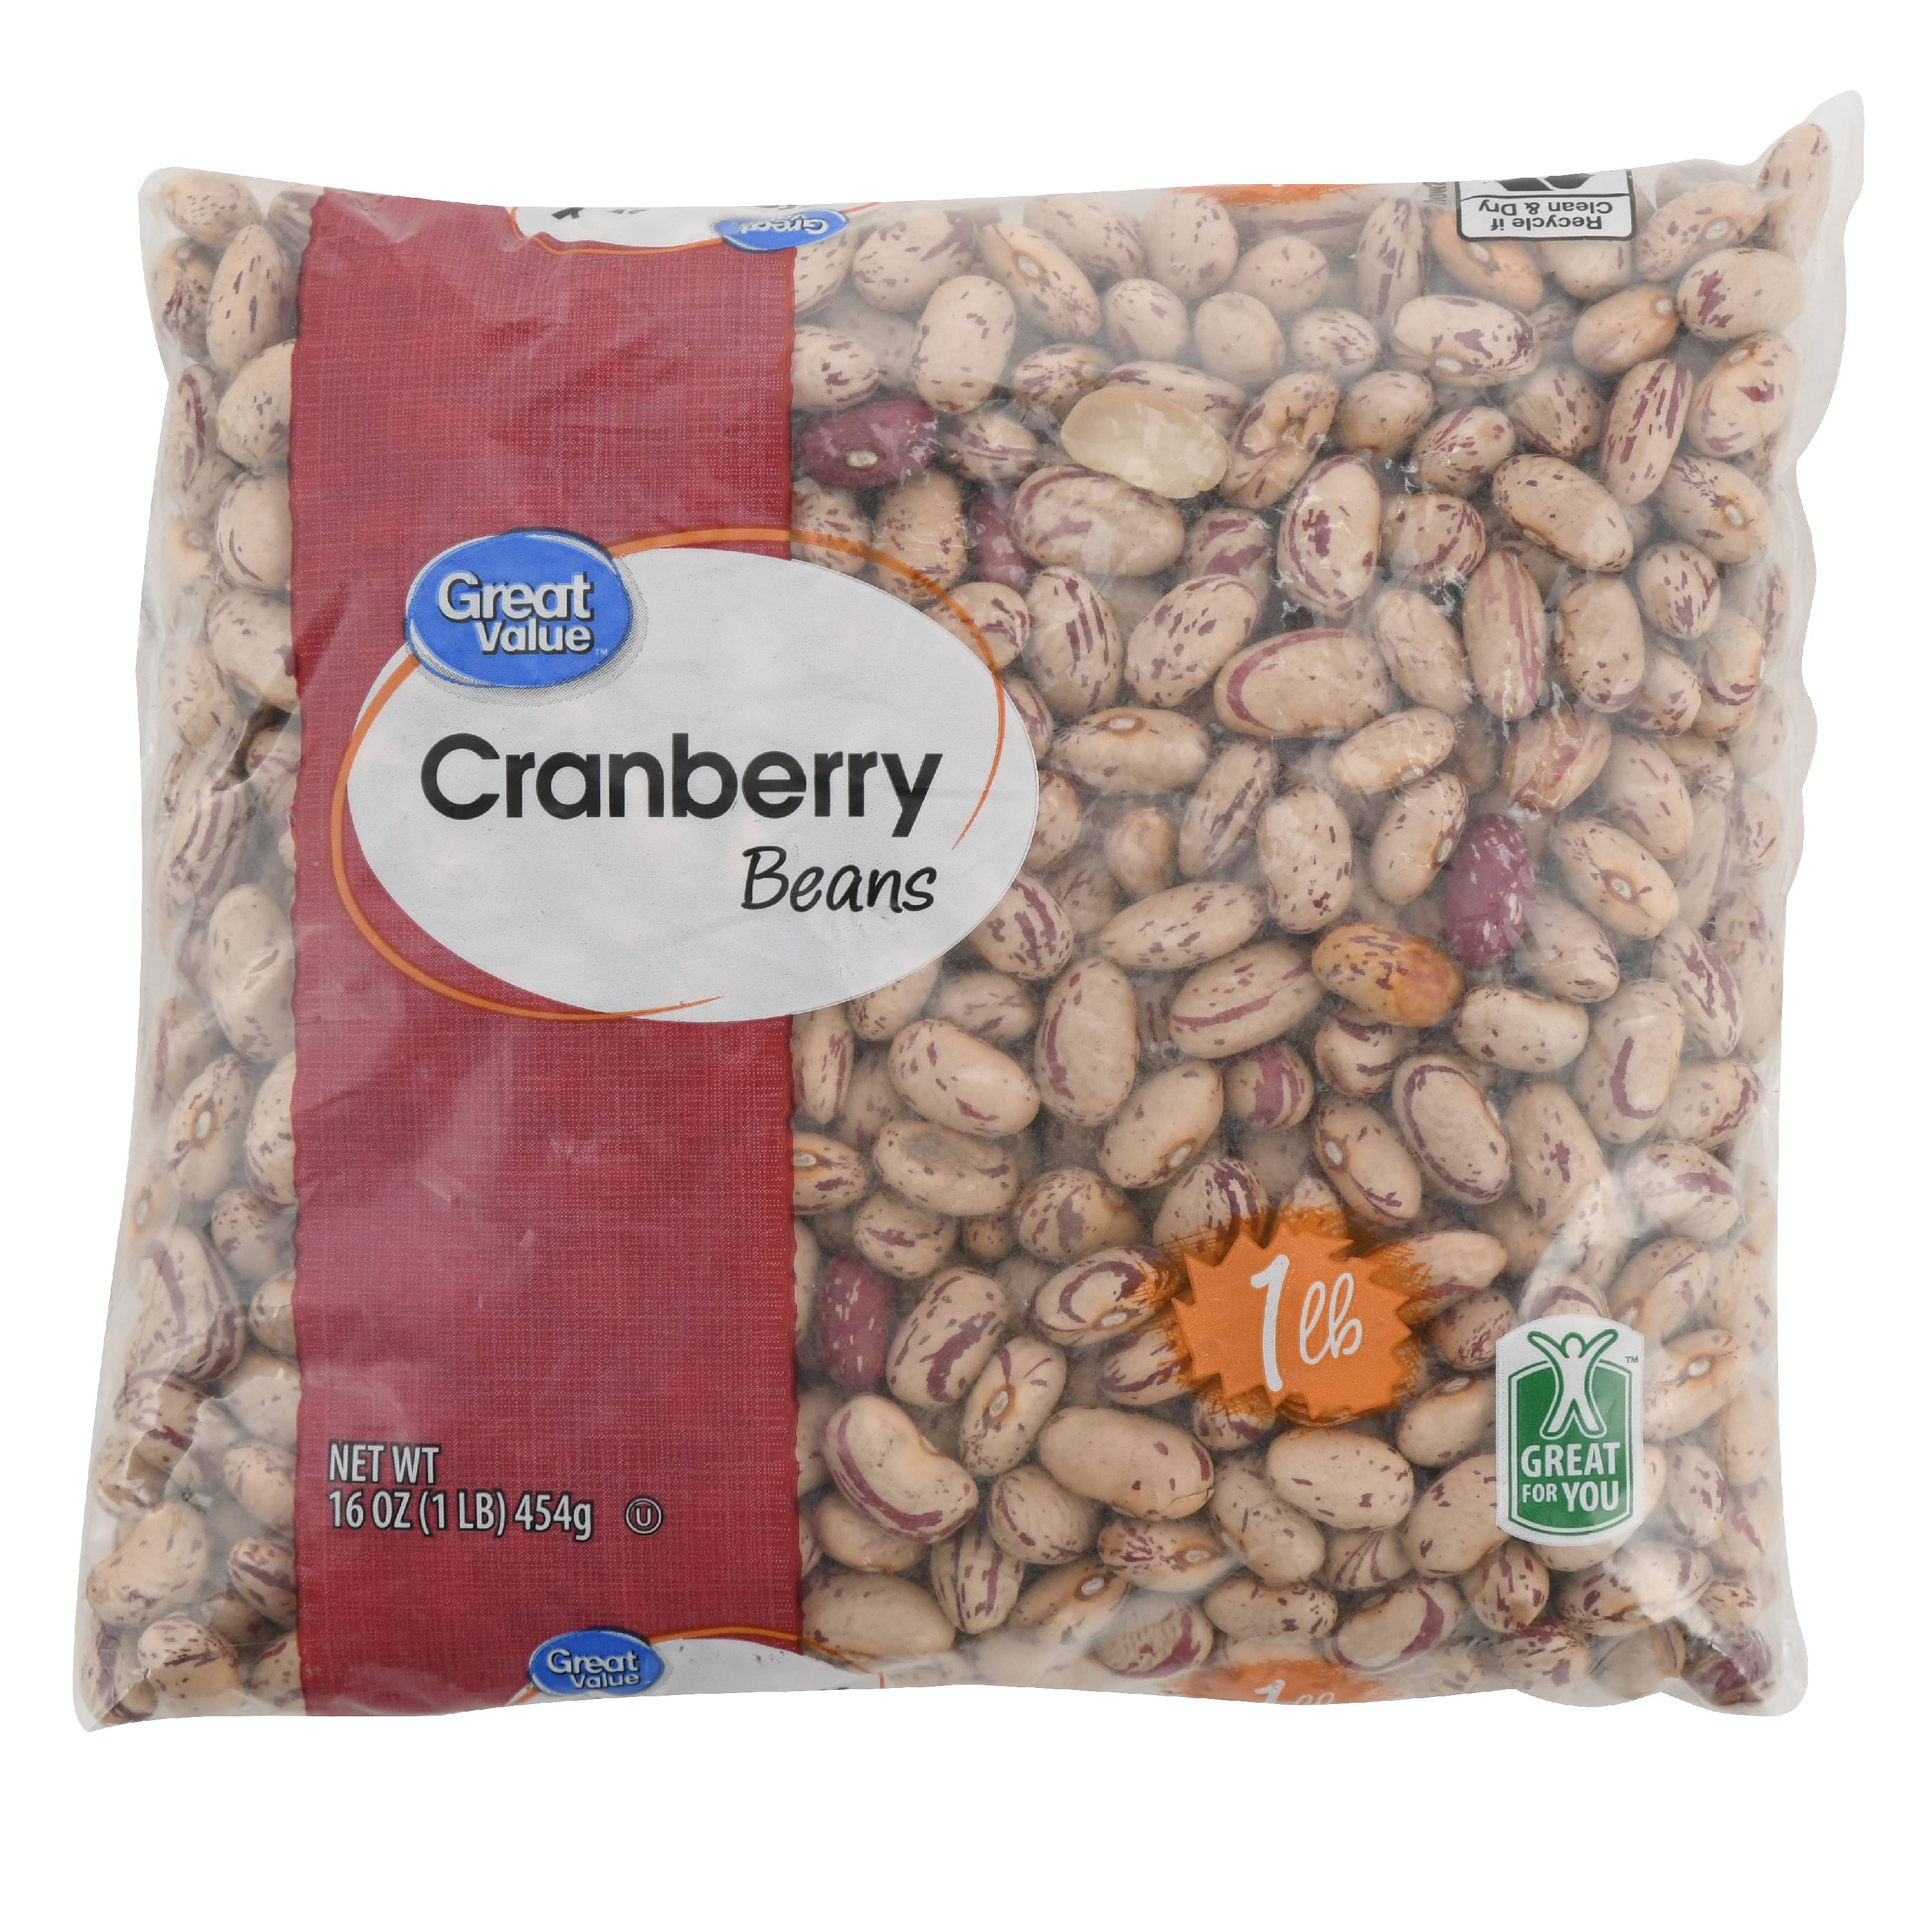 (4 Pack) Great Value Cranberry Beans, 16 Oz